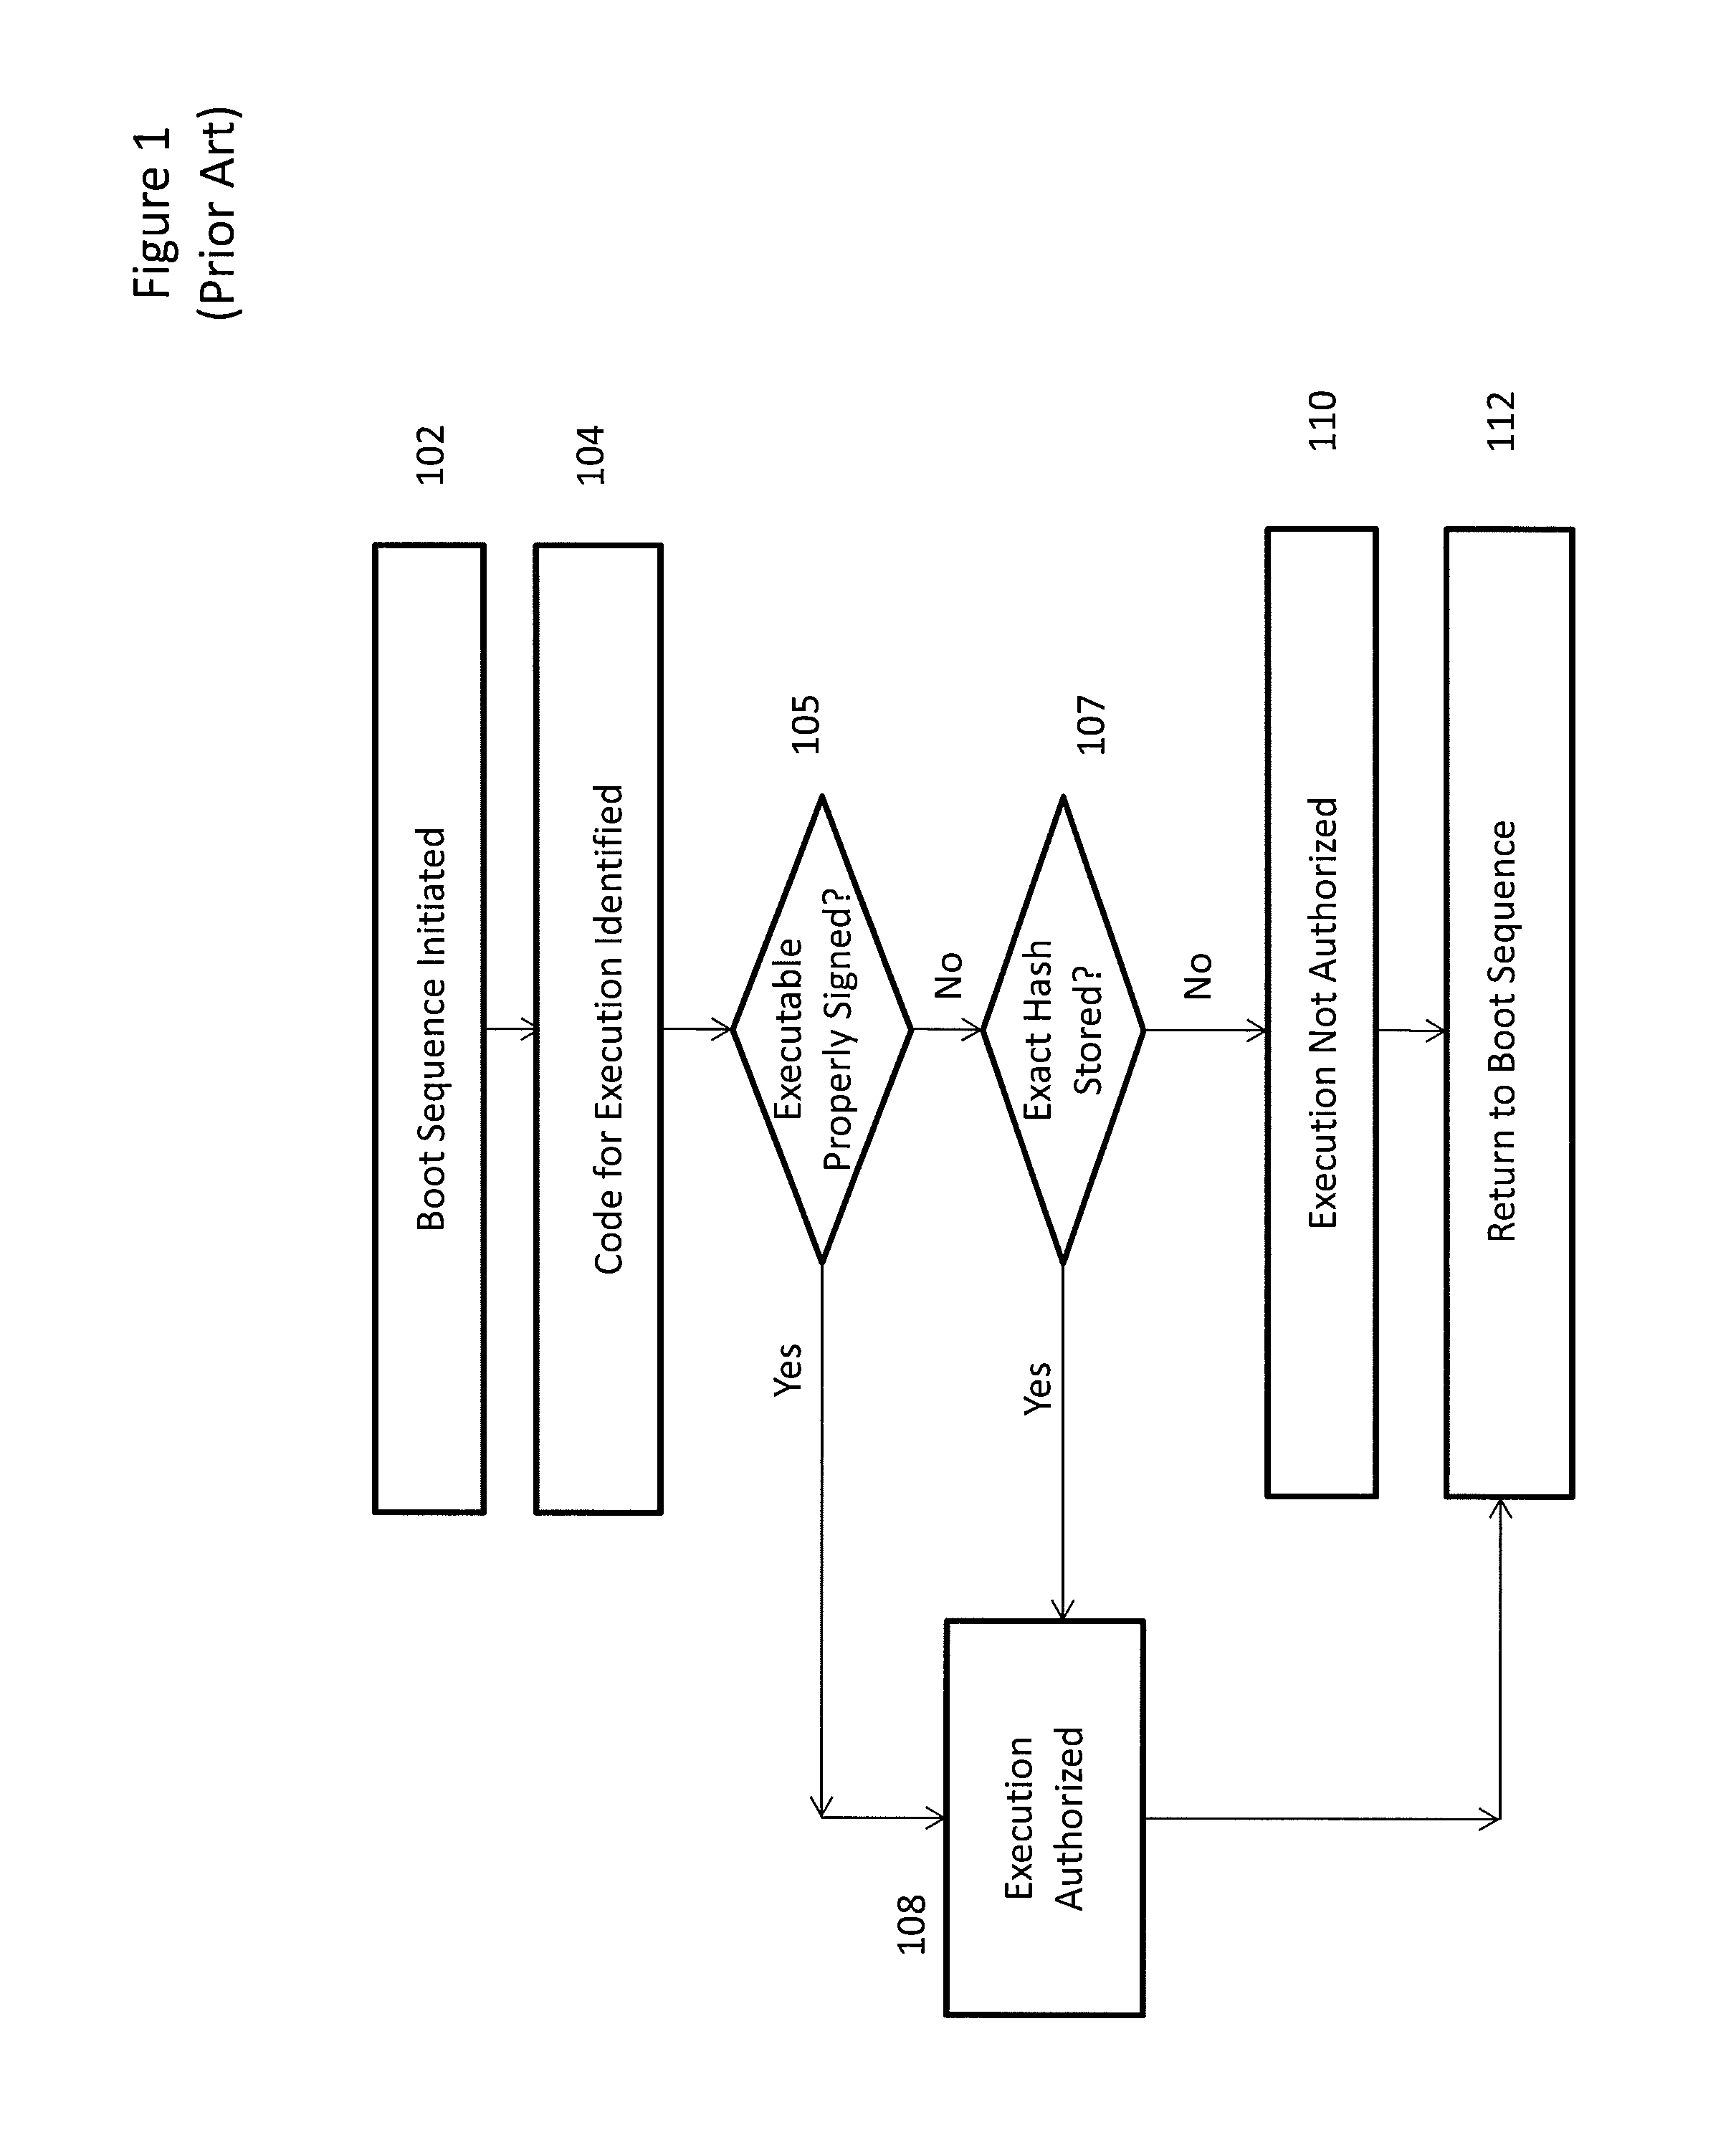 Secure boot administration in a Unified Extensible Firmware Interface (UEFI)-compliant computing device